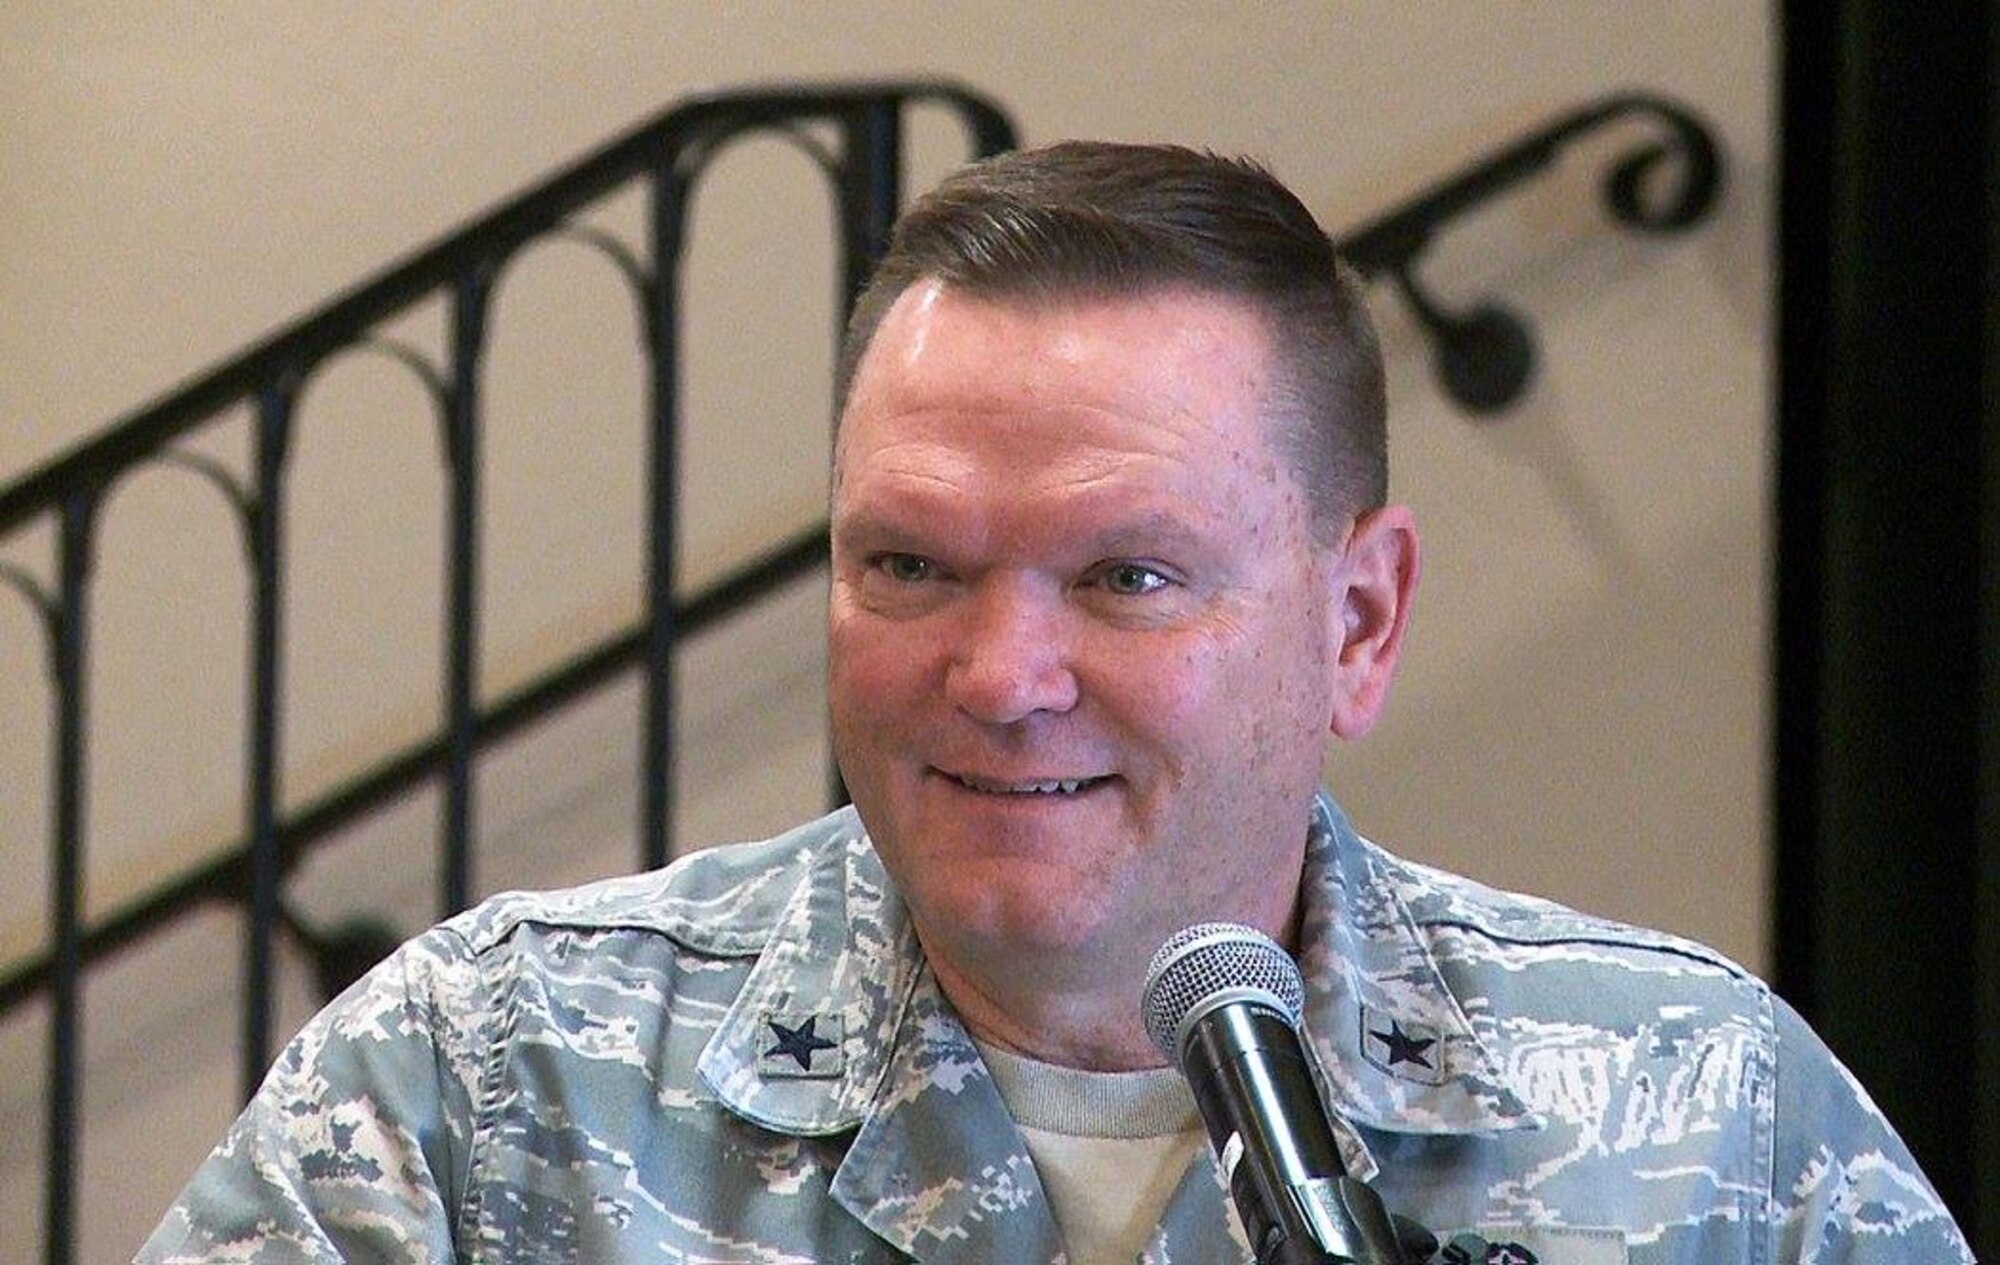 Brig. Gen. Samuel “Bo” Mahaney, Air Reserve Personnel Center commander, speaks to attendees during a breakfast honoring ARPC’s annual award winners Feb. 16, 2016, at the Heritage Eagle Bend Country Club in Aurora, Colo. (U.S. Air Force photo/Quinn Jacobson)